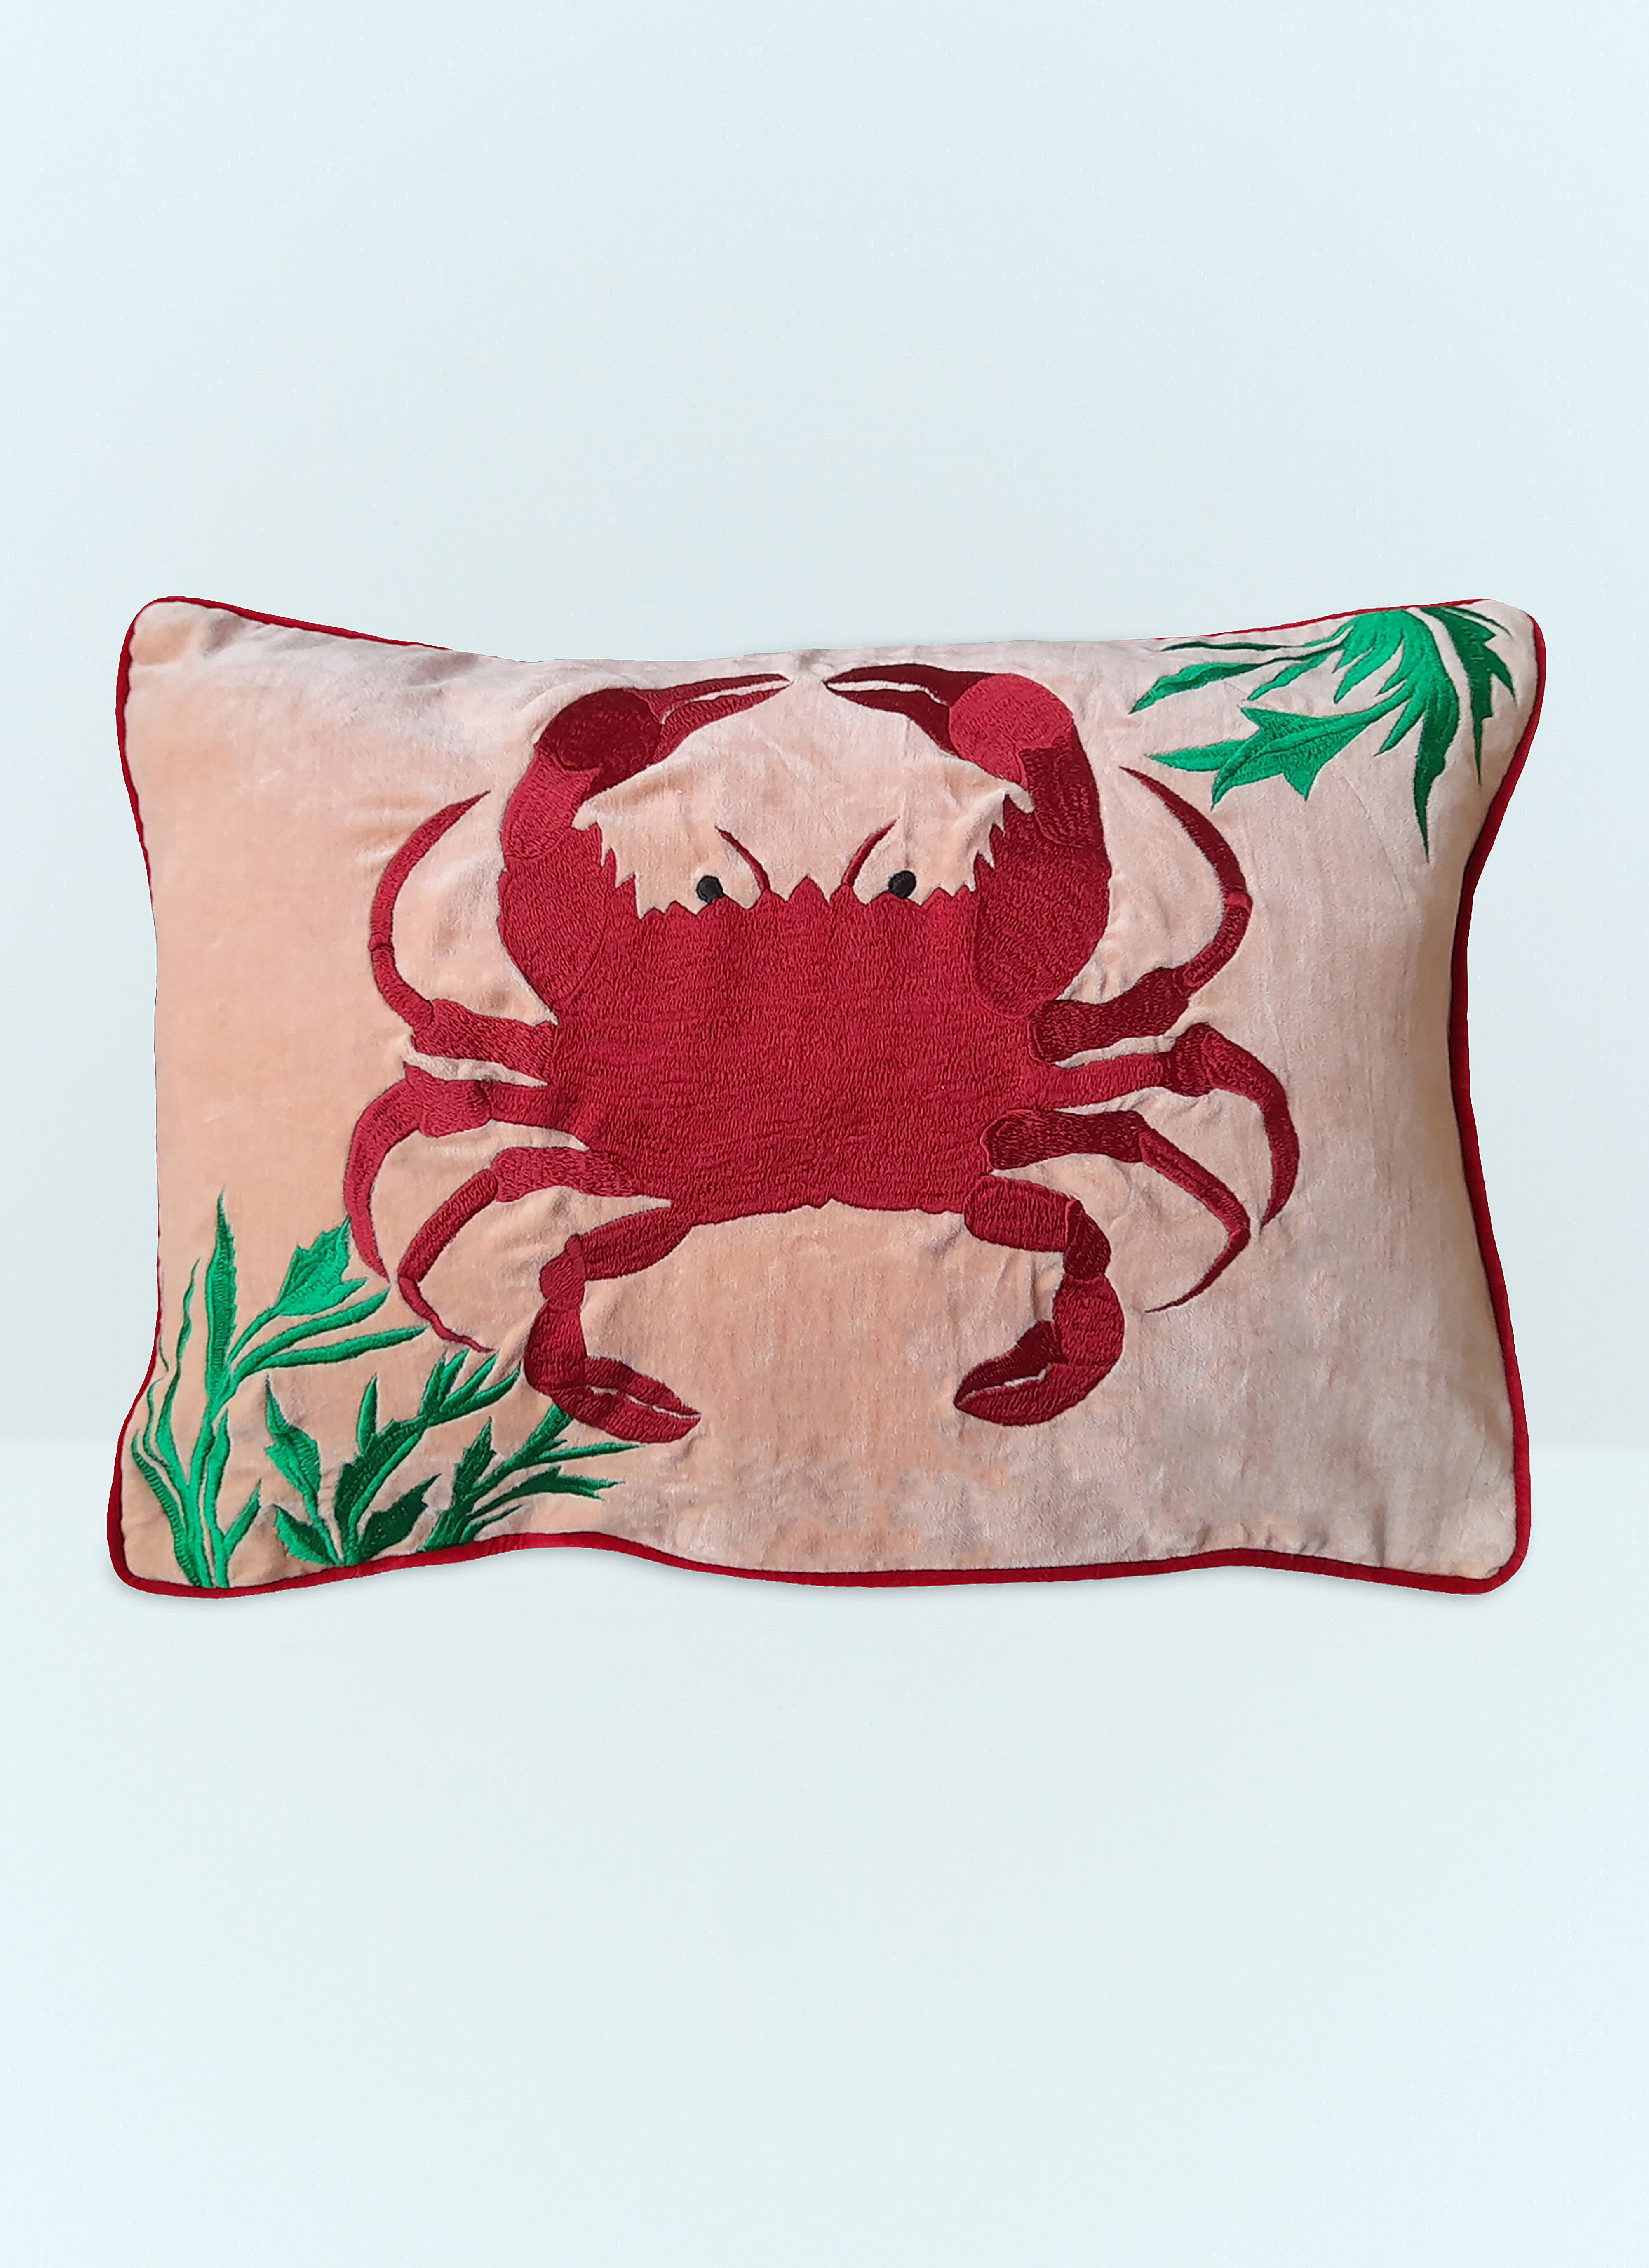 Les Ottomans Crab Embroidered Cushion White wps0691173